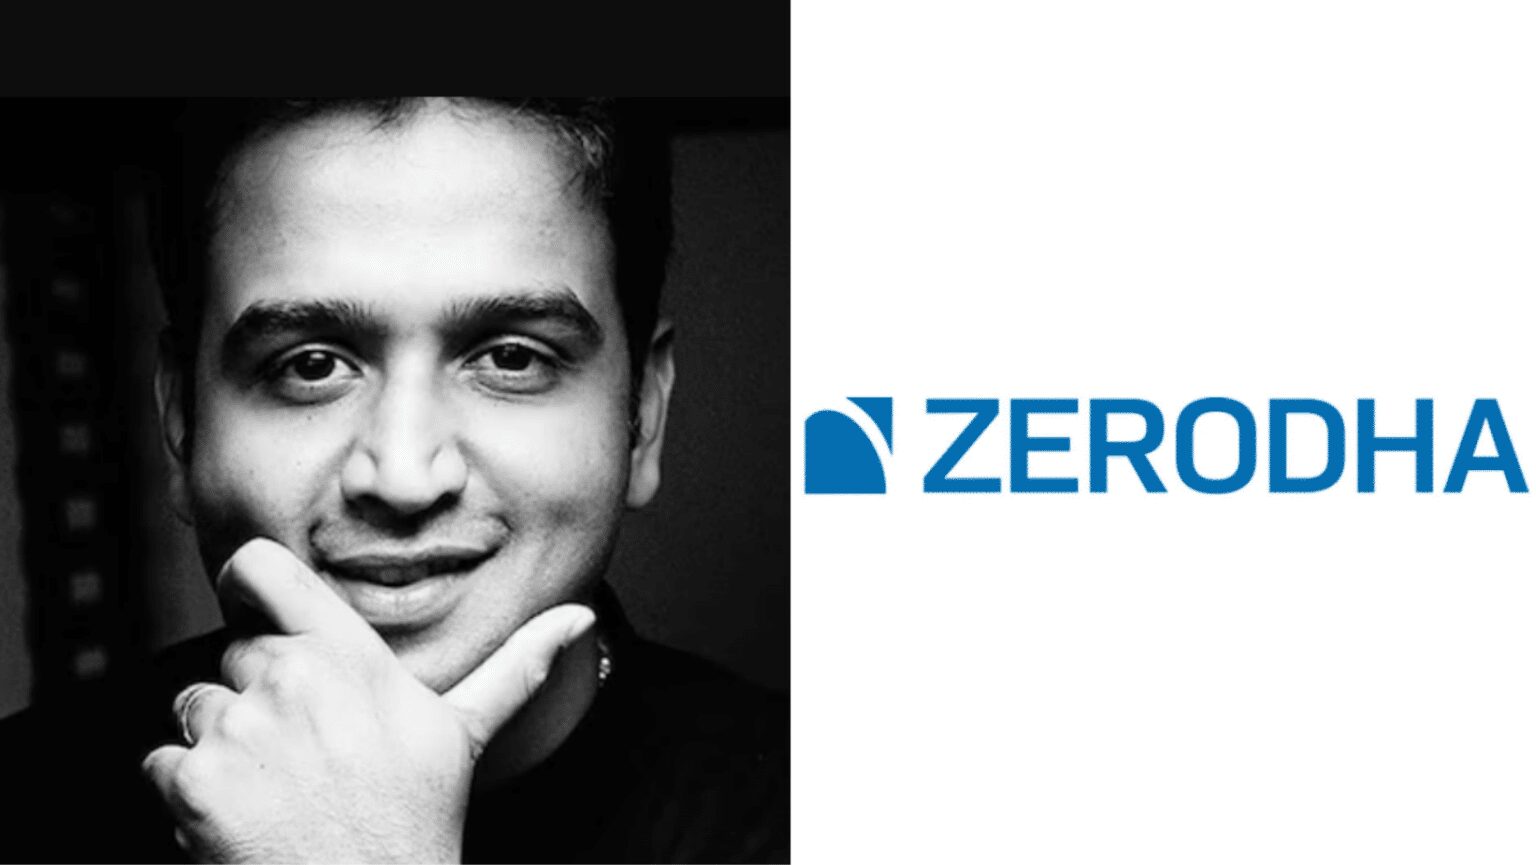 Nithin Kamath, co-founder, and CEO of Bengaluru-based financial services firm Zerodha has announced a health campaign in which anyone who meets a defined target on 90% of days over the next year would receive a bonus. Zerodha, a financial services company that had urged its staff to focus on their health during the 2020 Covid epidemic, has now made fitness a routine.